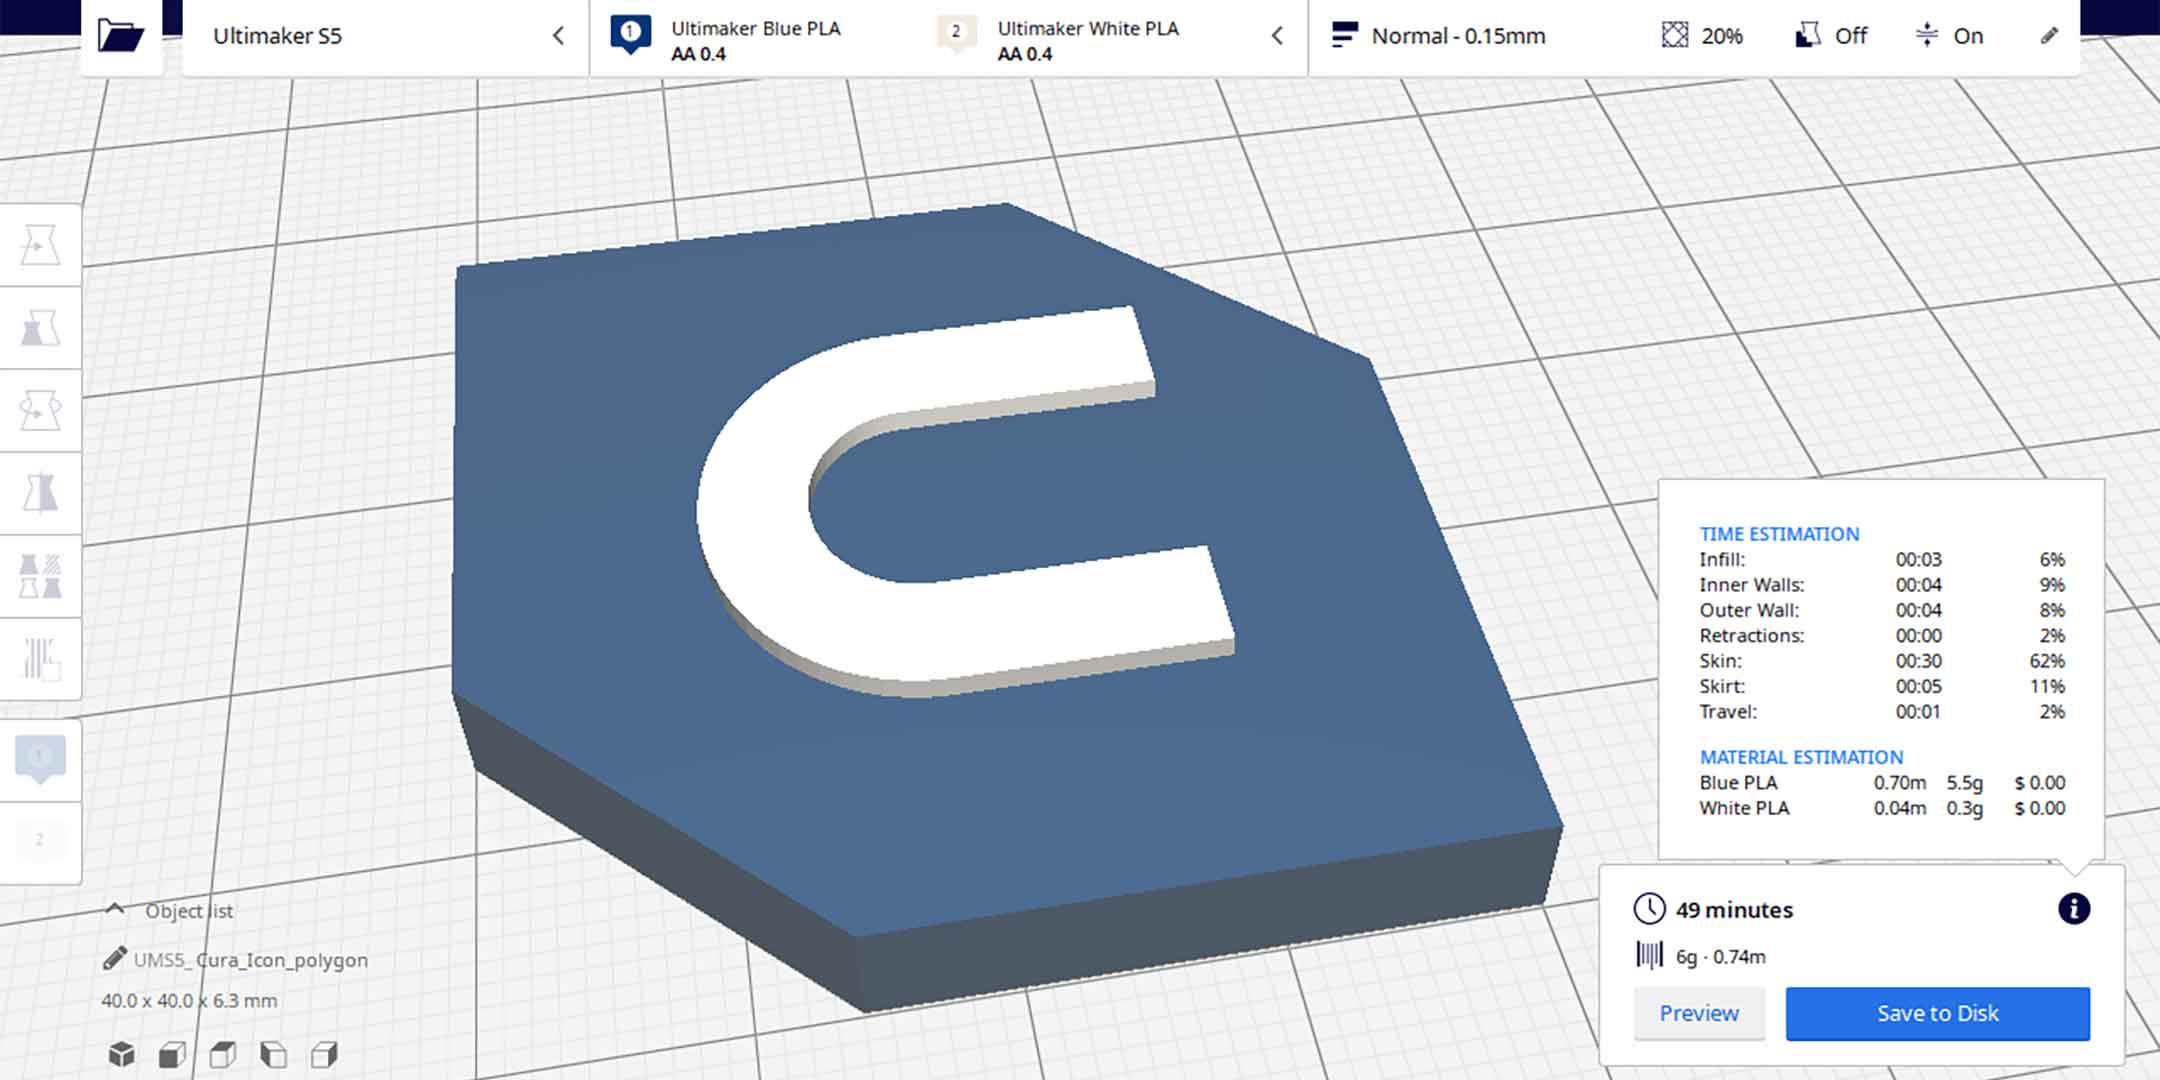 More accurate weight estimations in Ultimaker Cura